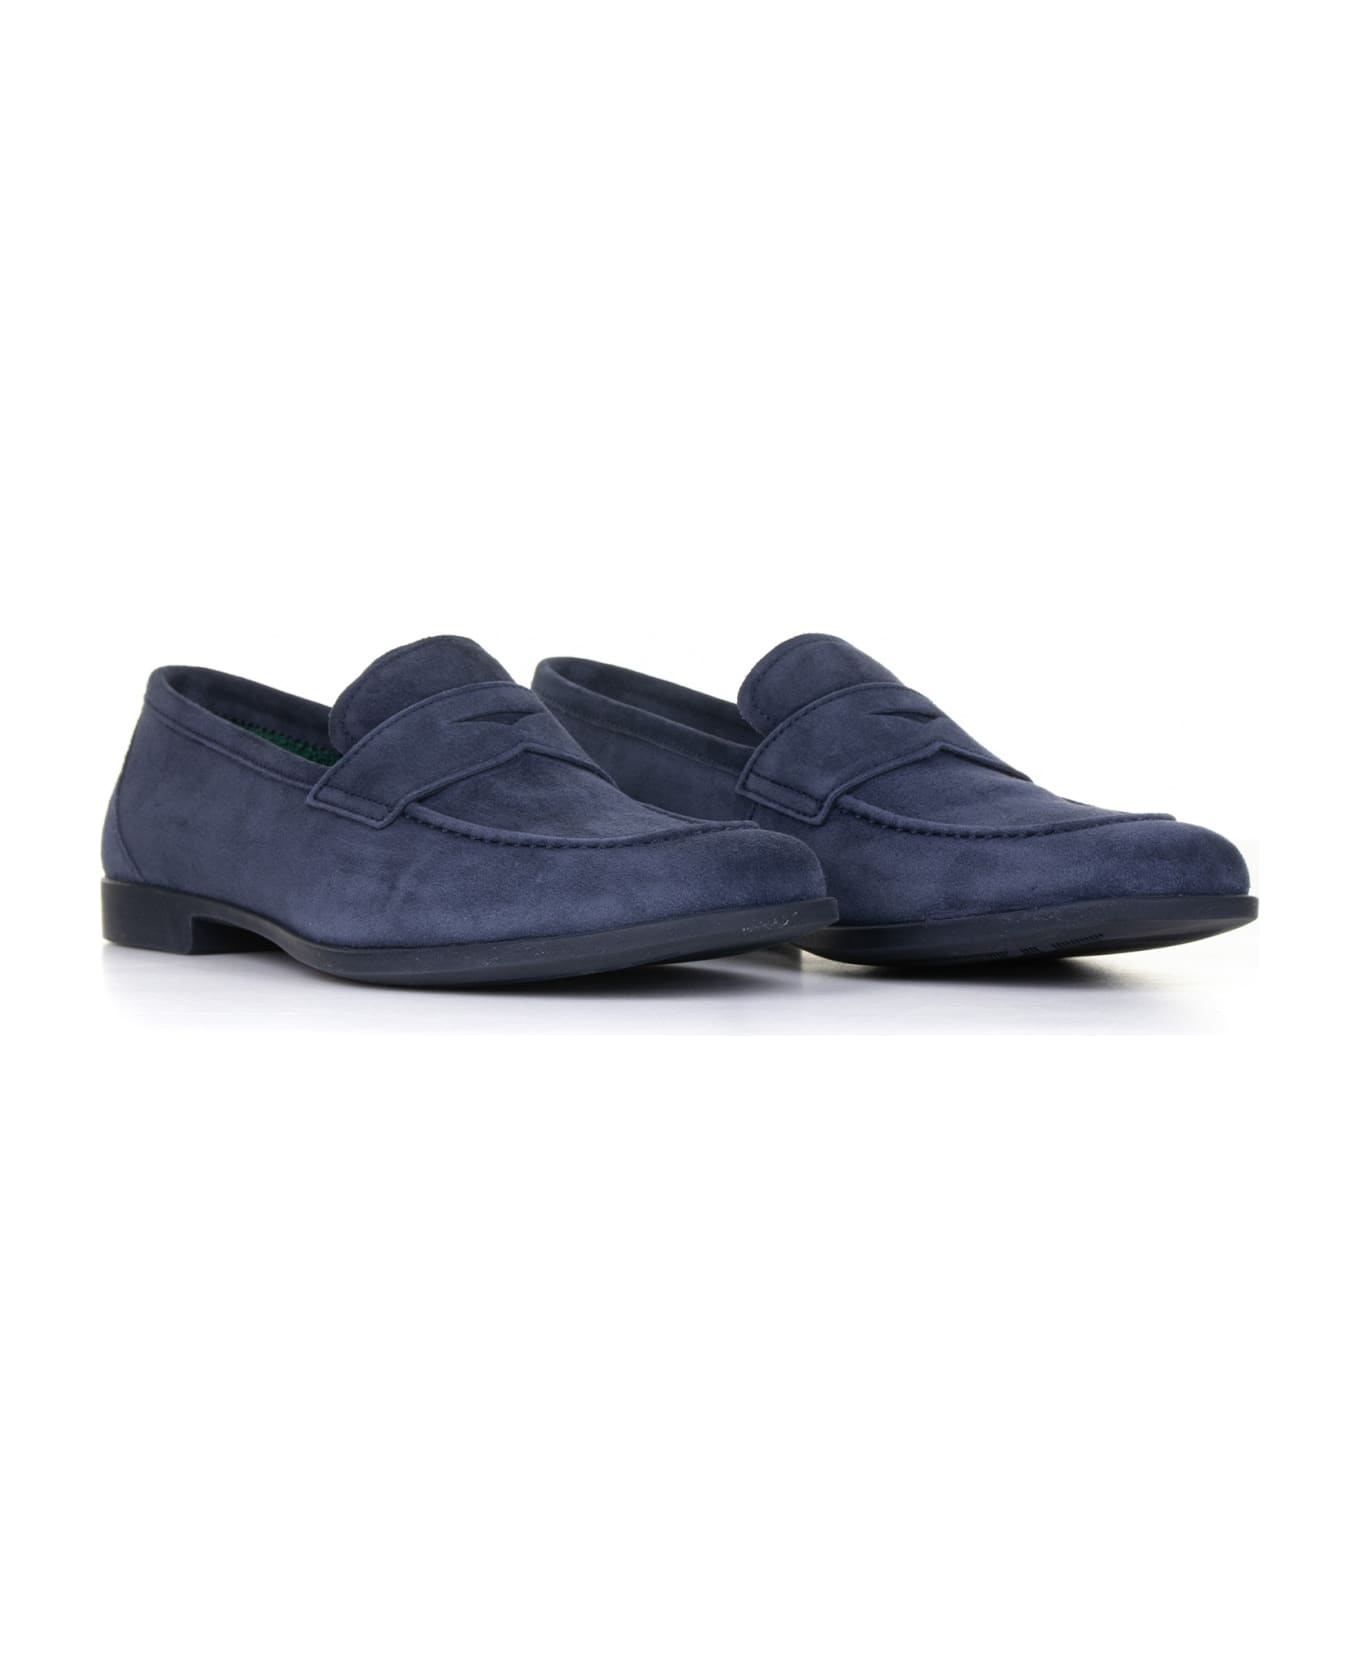 Fratelli Rossetti One Blue Suede Loafer - NAVY ローファー＆デッキシューズ